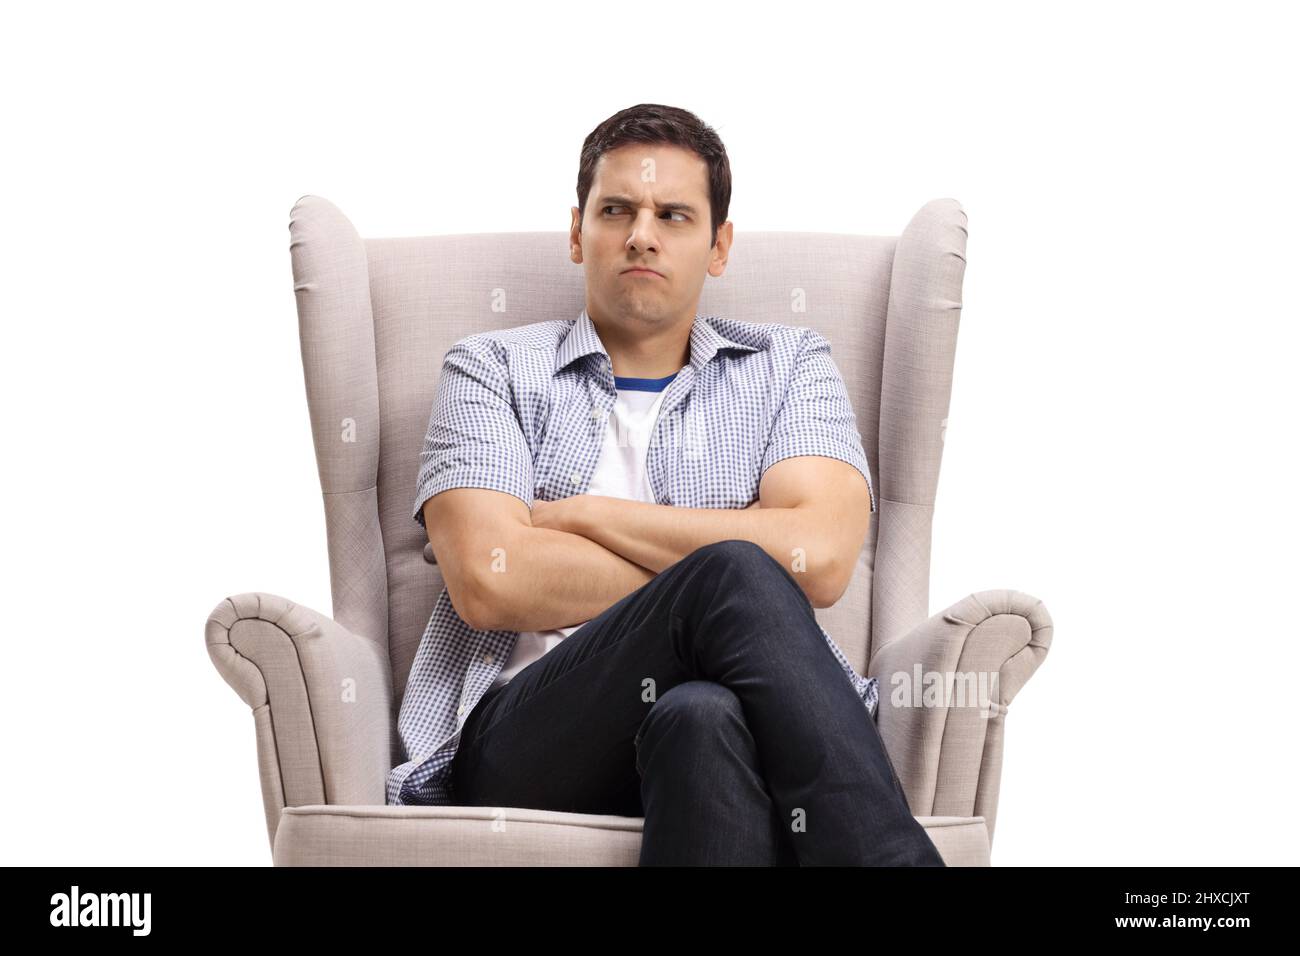 Young man with an angry face sitting in an armchair isolated on white background Stock Photo